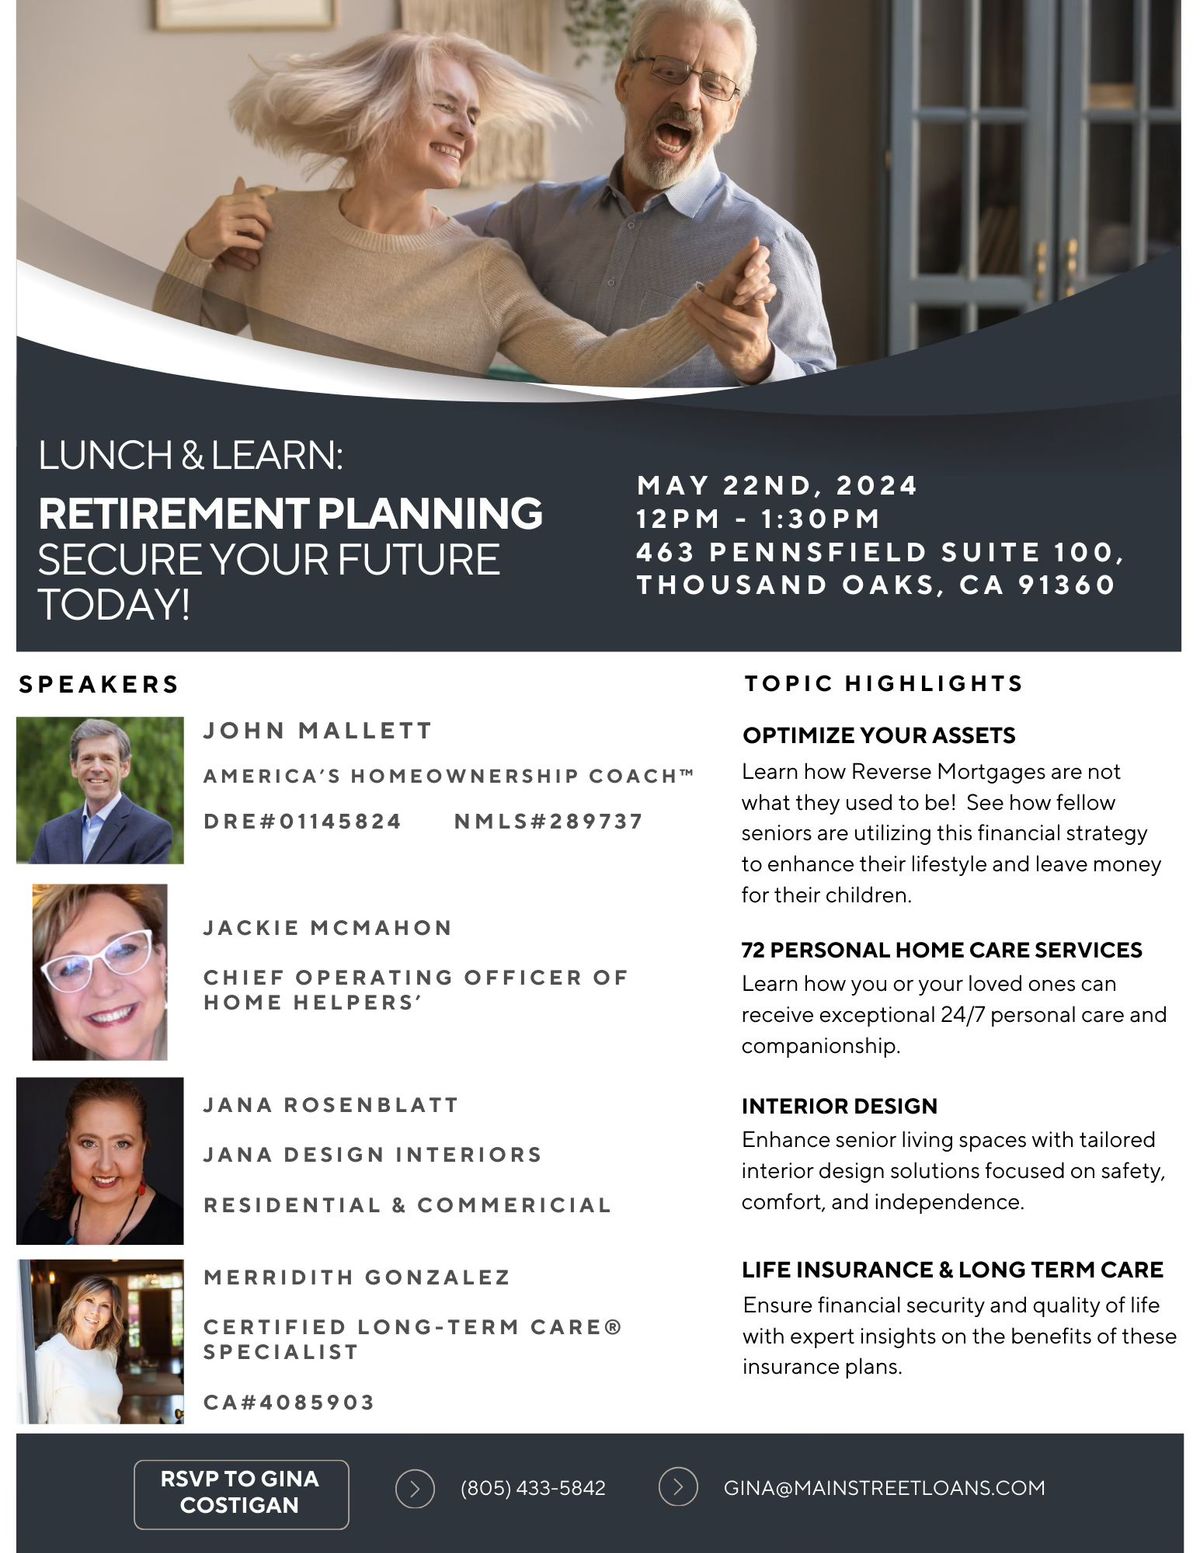 Lunch & Learn: Retirement Planning, Secure Your Future Today!